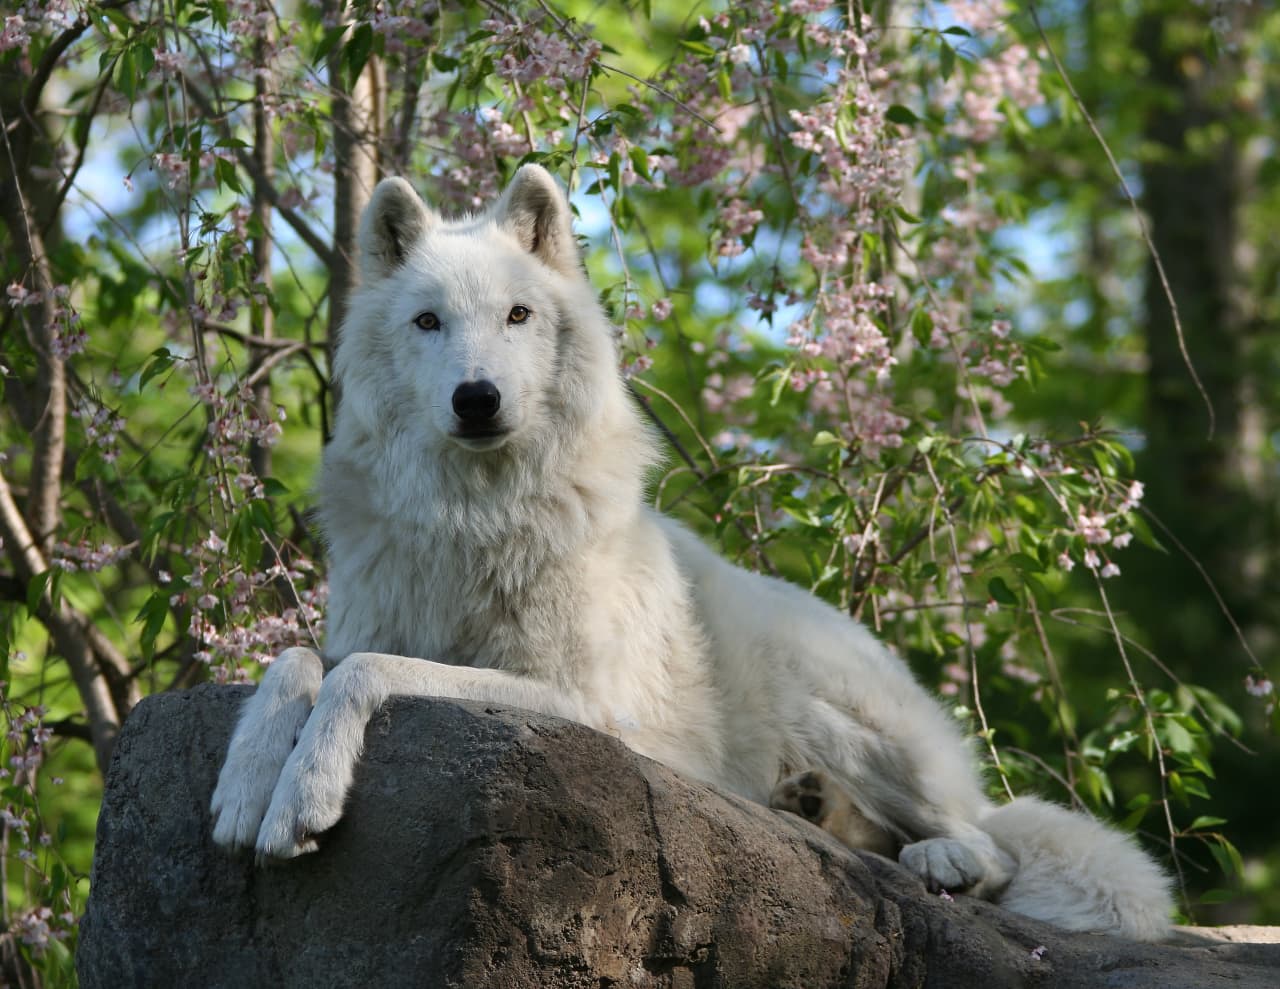 The Artic gray ambassador wolf Akta, from the Wolf Conservation Center, will be on hand to teach festival visitors about the important role we all play in environmental conservation.